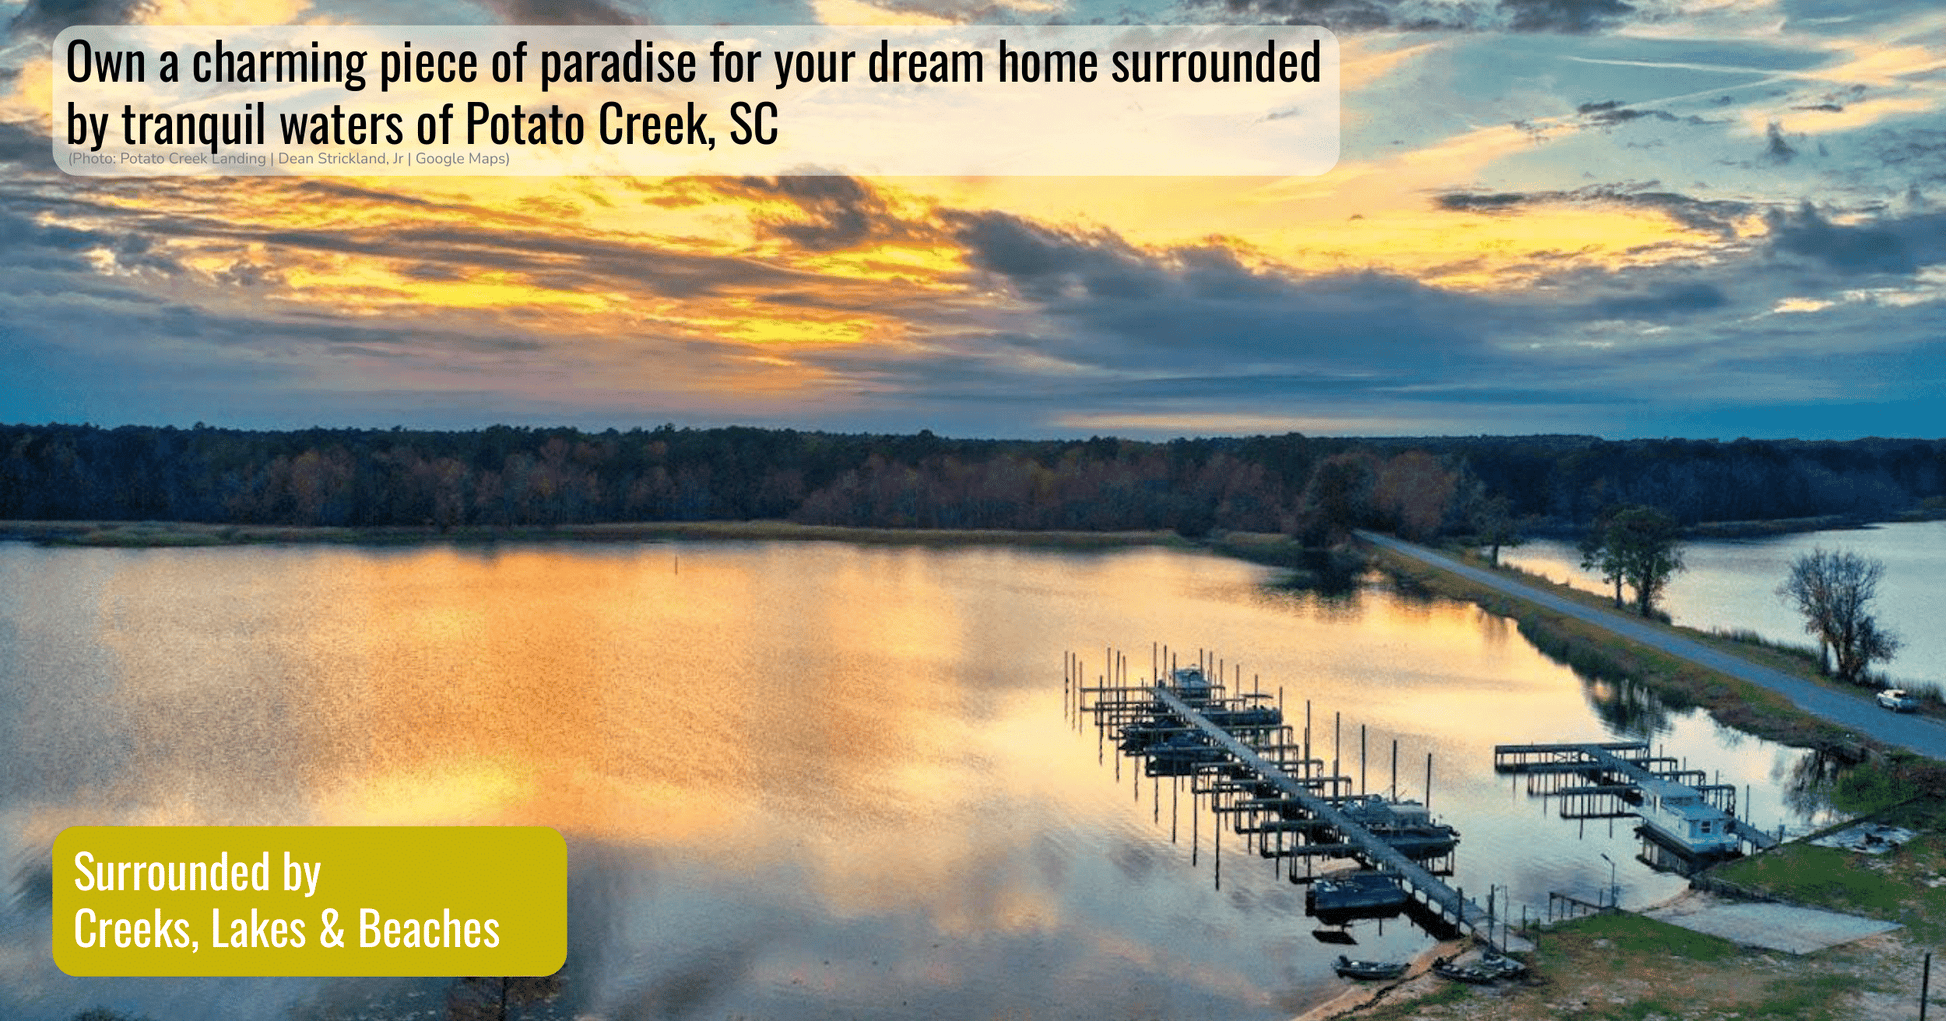 Build your Dream Home surrounded by tranquil waters of Potato Creek, SC